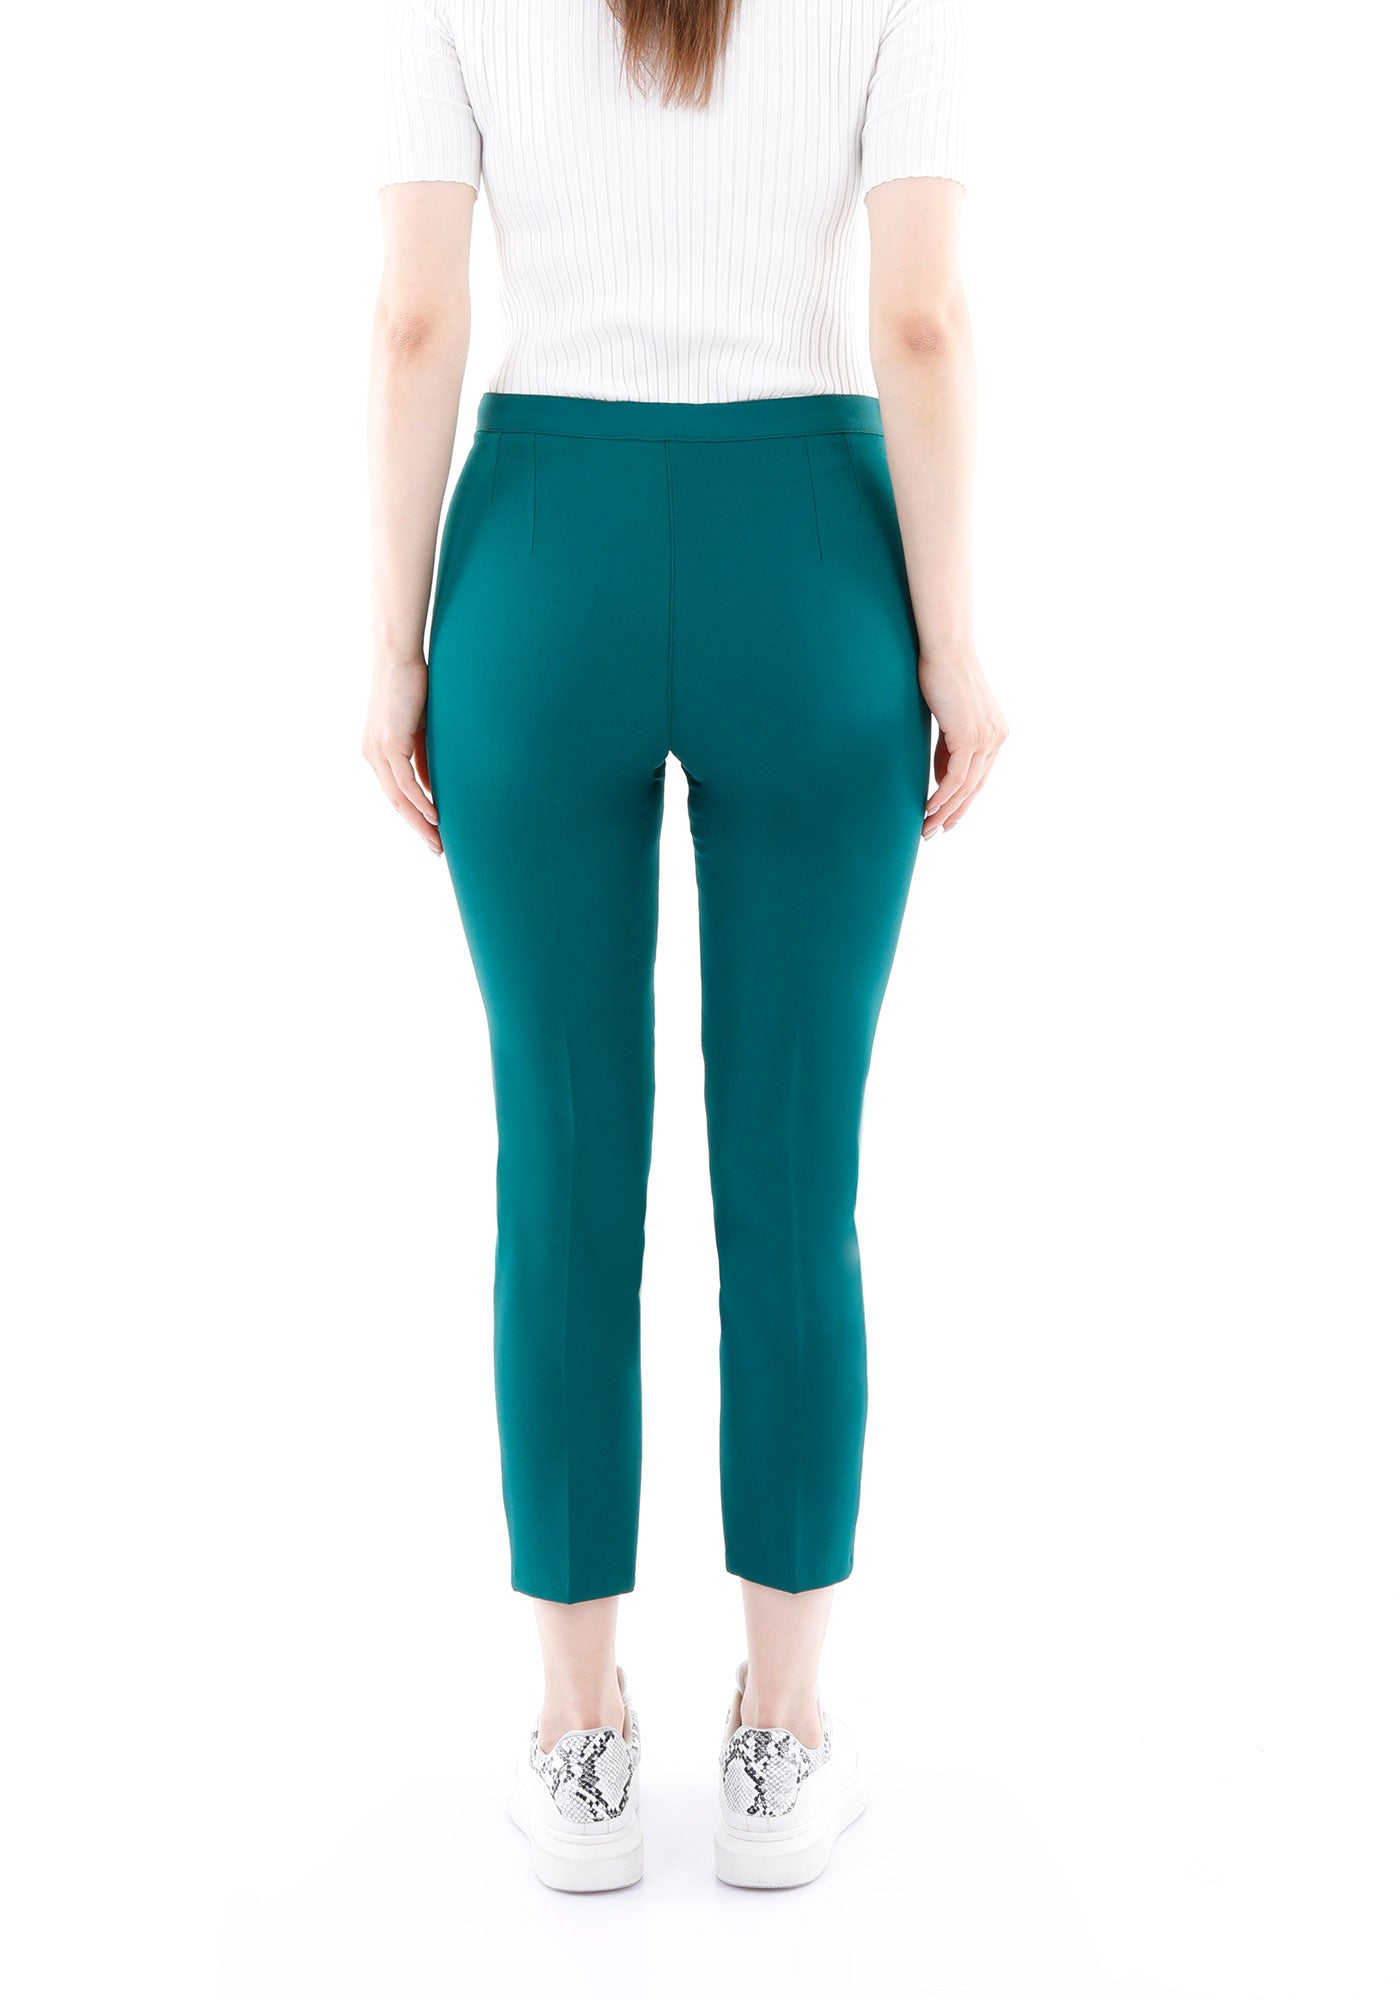 Copy of Copper Ankle-Length Slim-Fit/Skinny Pants for Women G-Line